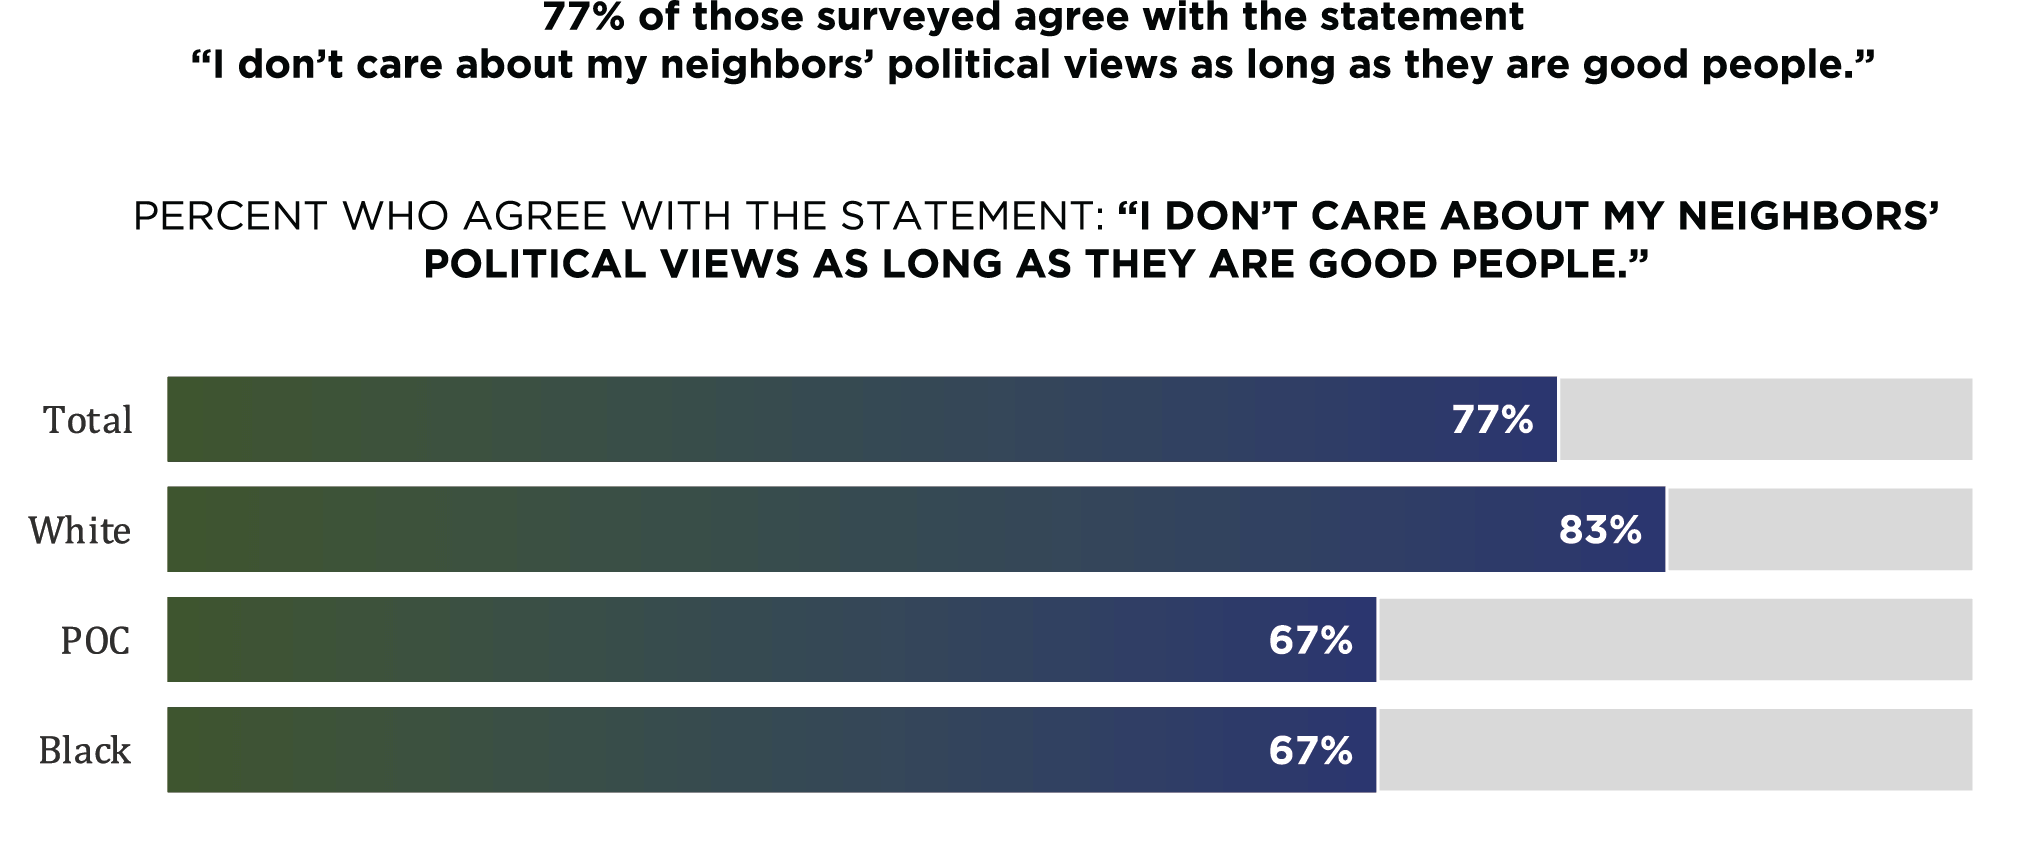 77% of those surveyed agree with the statement "I don't care about my neighbors' political views as long as they are good people." Percent who agree with the statement: "I don't care about my neighbors' political views as long as they are good people."